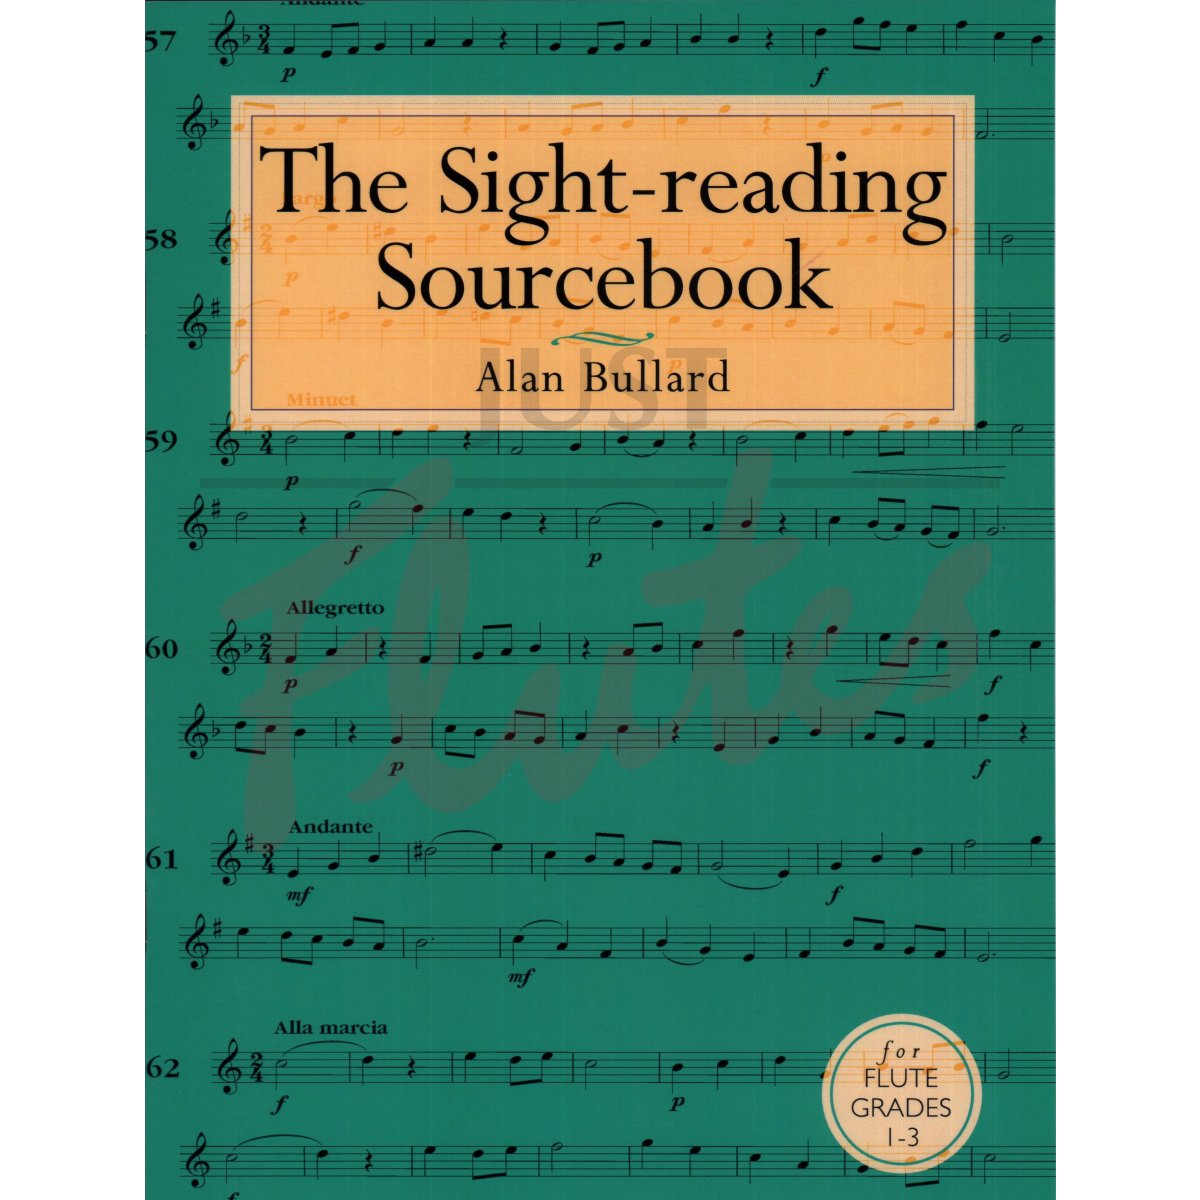 The Sight-Reading Sourcebook for Flute Grades 1-3